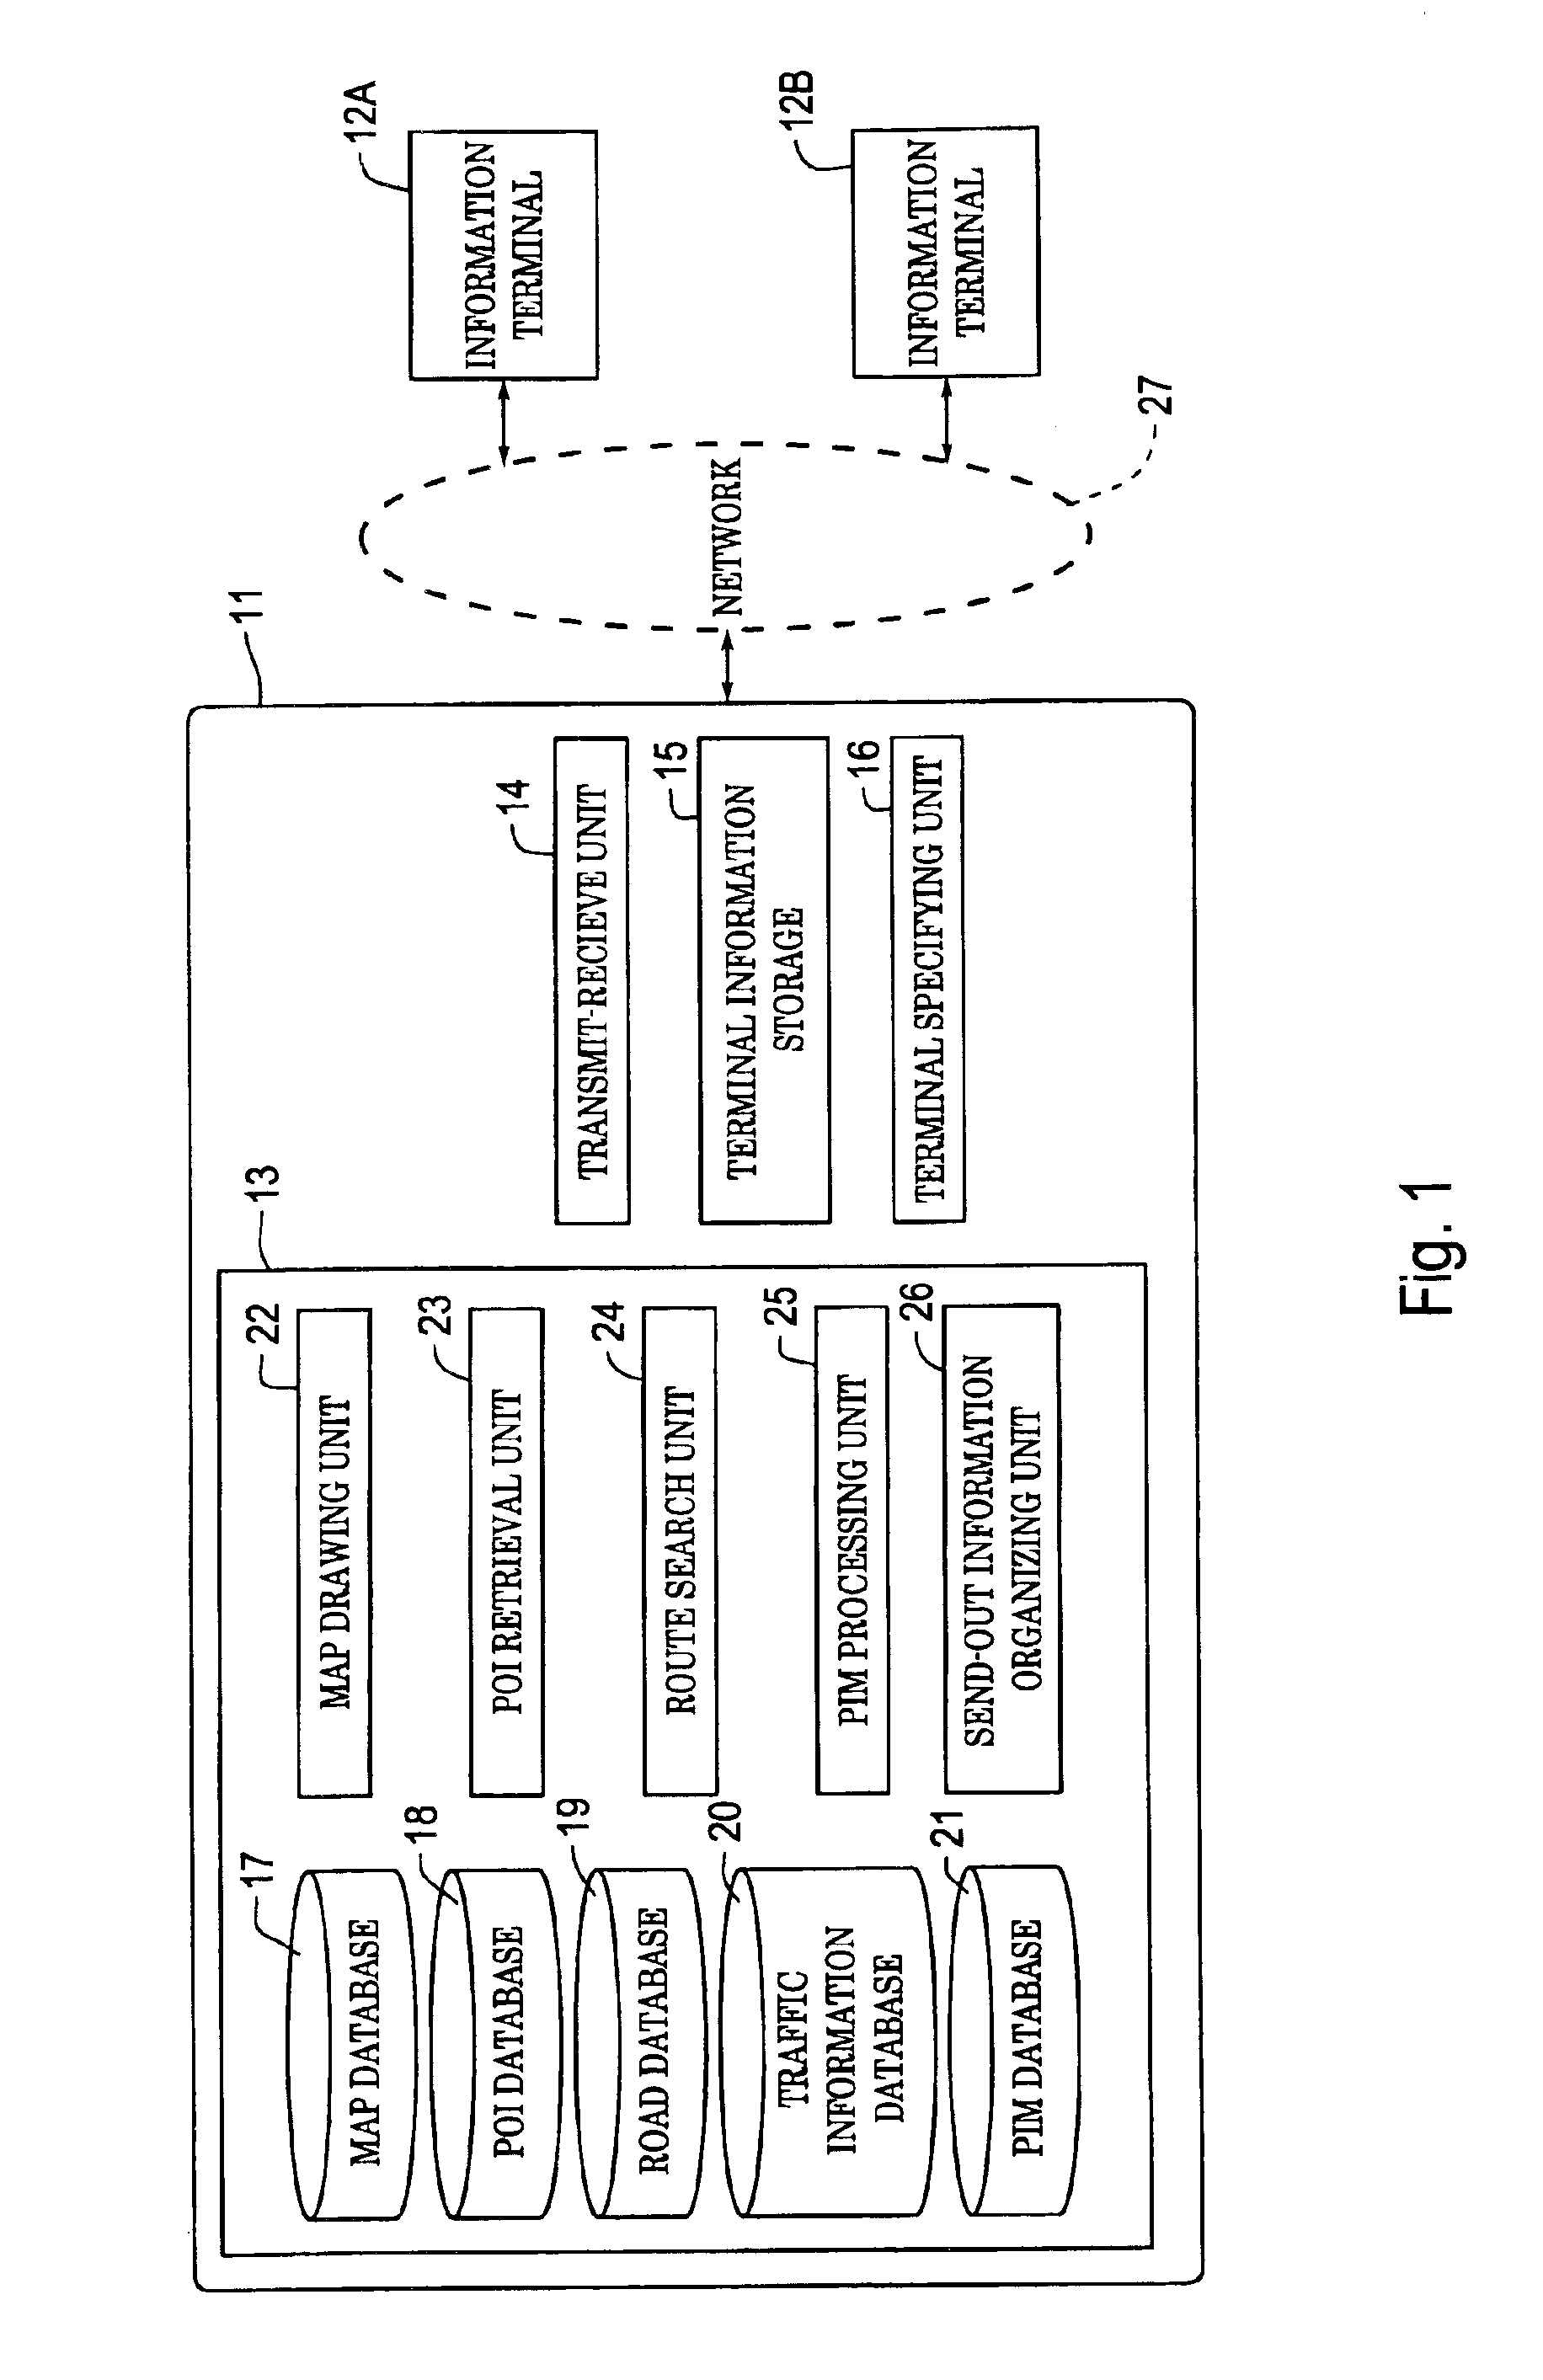 Information display system for use with a navigation system